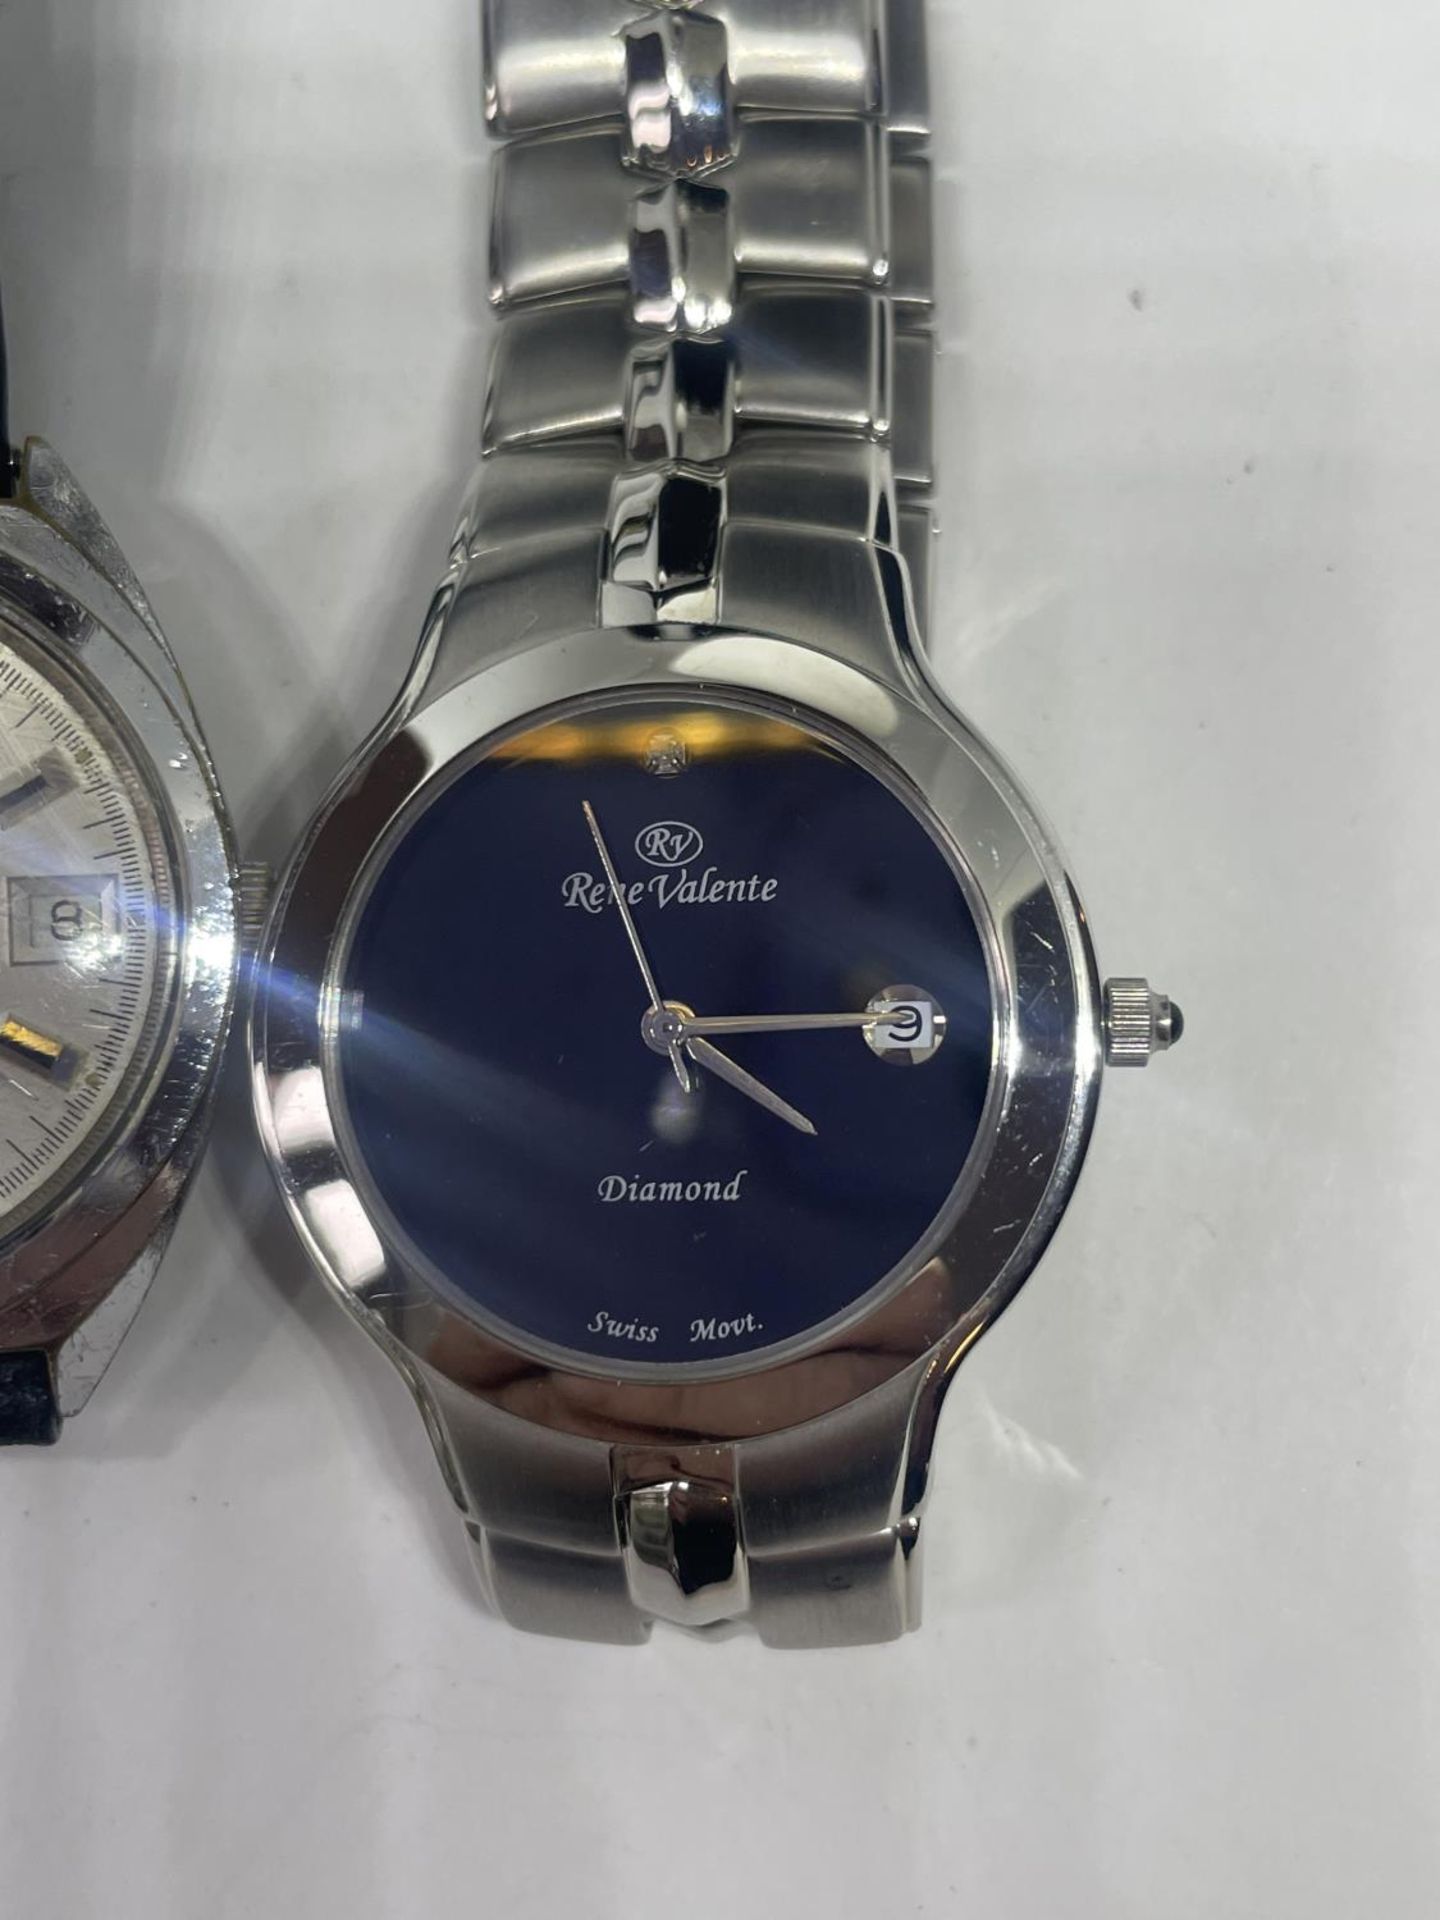 TWO WRIST WATCHES SEEN WORKING BUT NO WARRANTY - Image 3 of 3